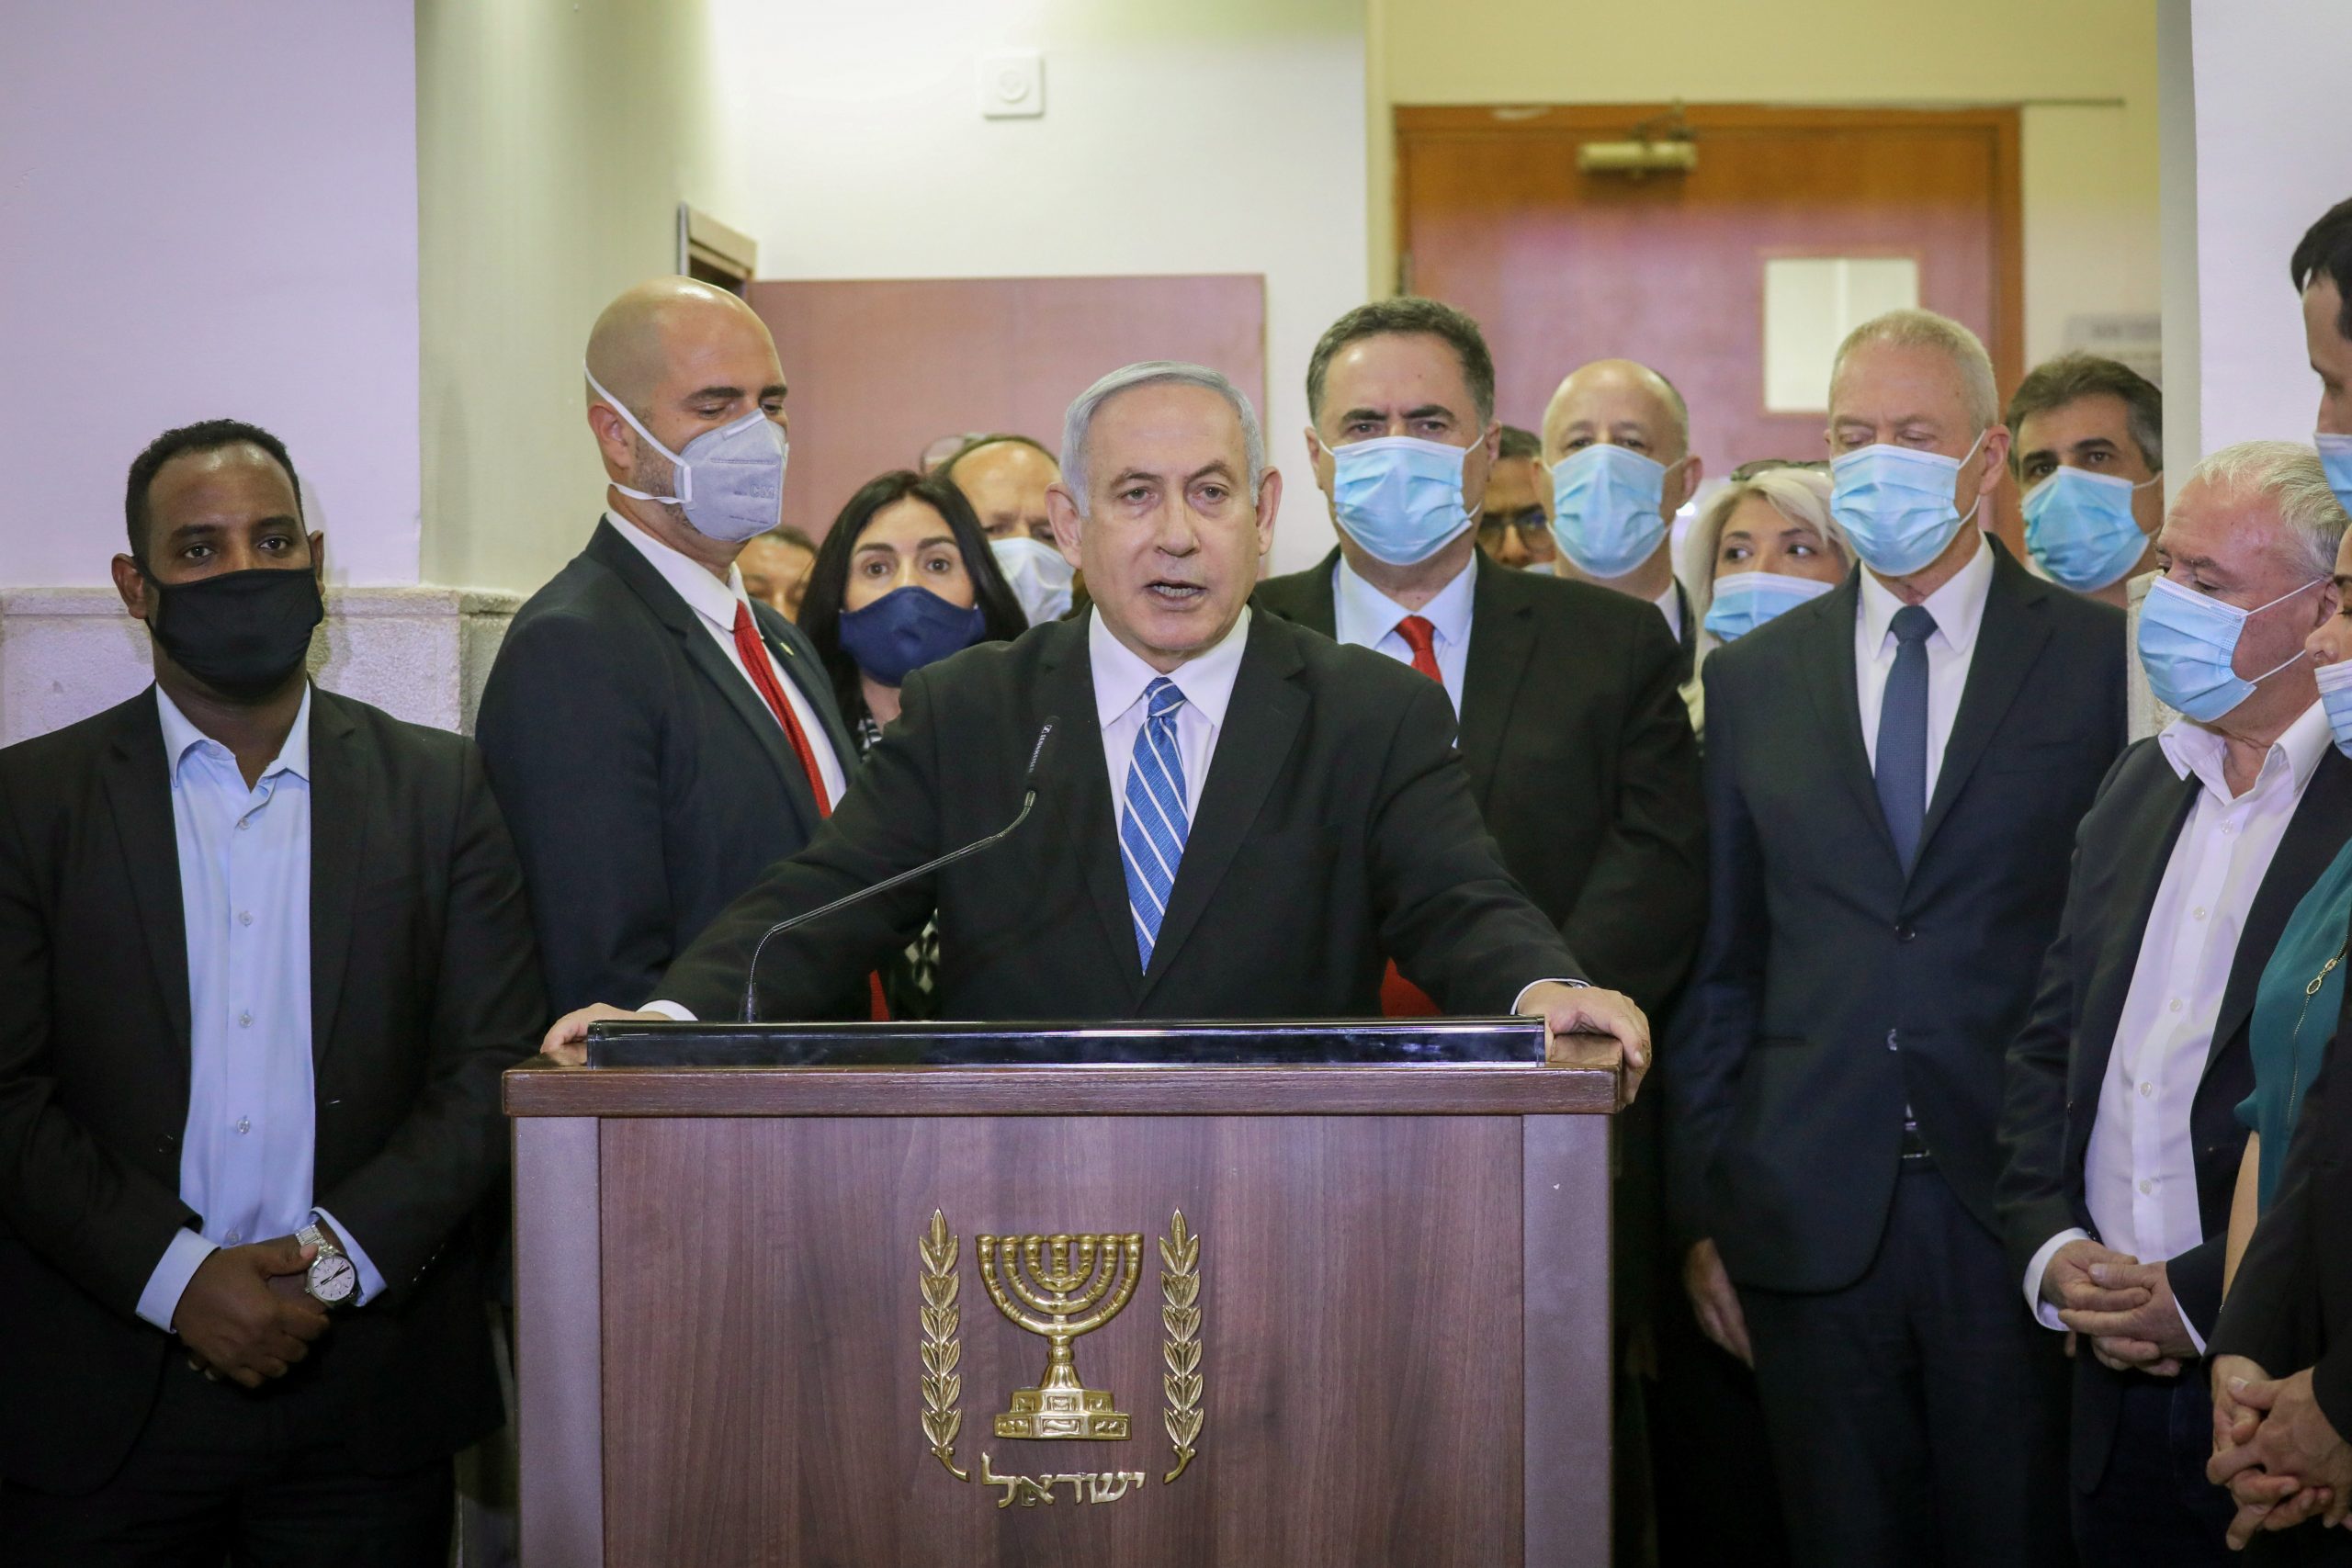 epa08441309 Israeli Prime Minister Benjamin Netanyahu delivers a statement  before entering the district court room where he is facing a trial for alleged corruption crimes in Salah El-Din, East Jerusalem, 24 May 2020. Netanyahu has been charged with counts of bribery, fraud and breach of trust, becoming the first Israeli leader to be tried for alleged corruption while still in office. The trial comes only a week after Netanyahu was sworn into office for another term following a rare power-sharing deal with his adversary, who is set to take over as prime minister in 18 months as he switches roles with Netanyahu, who would then become Gantz's deputy.  EPA/YONATAN SINDEL / POOL